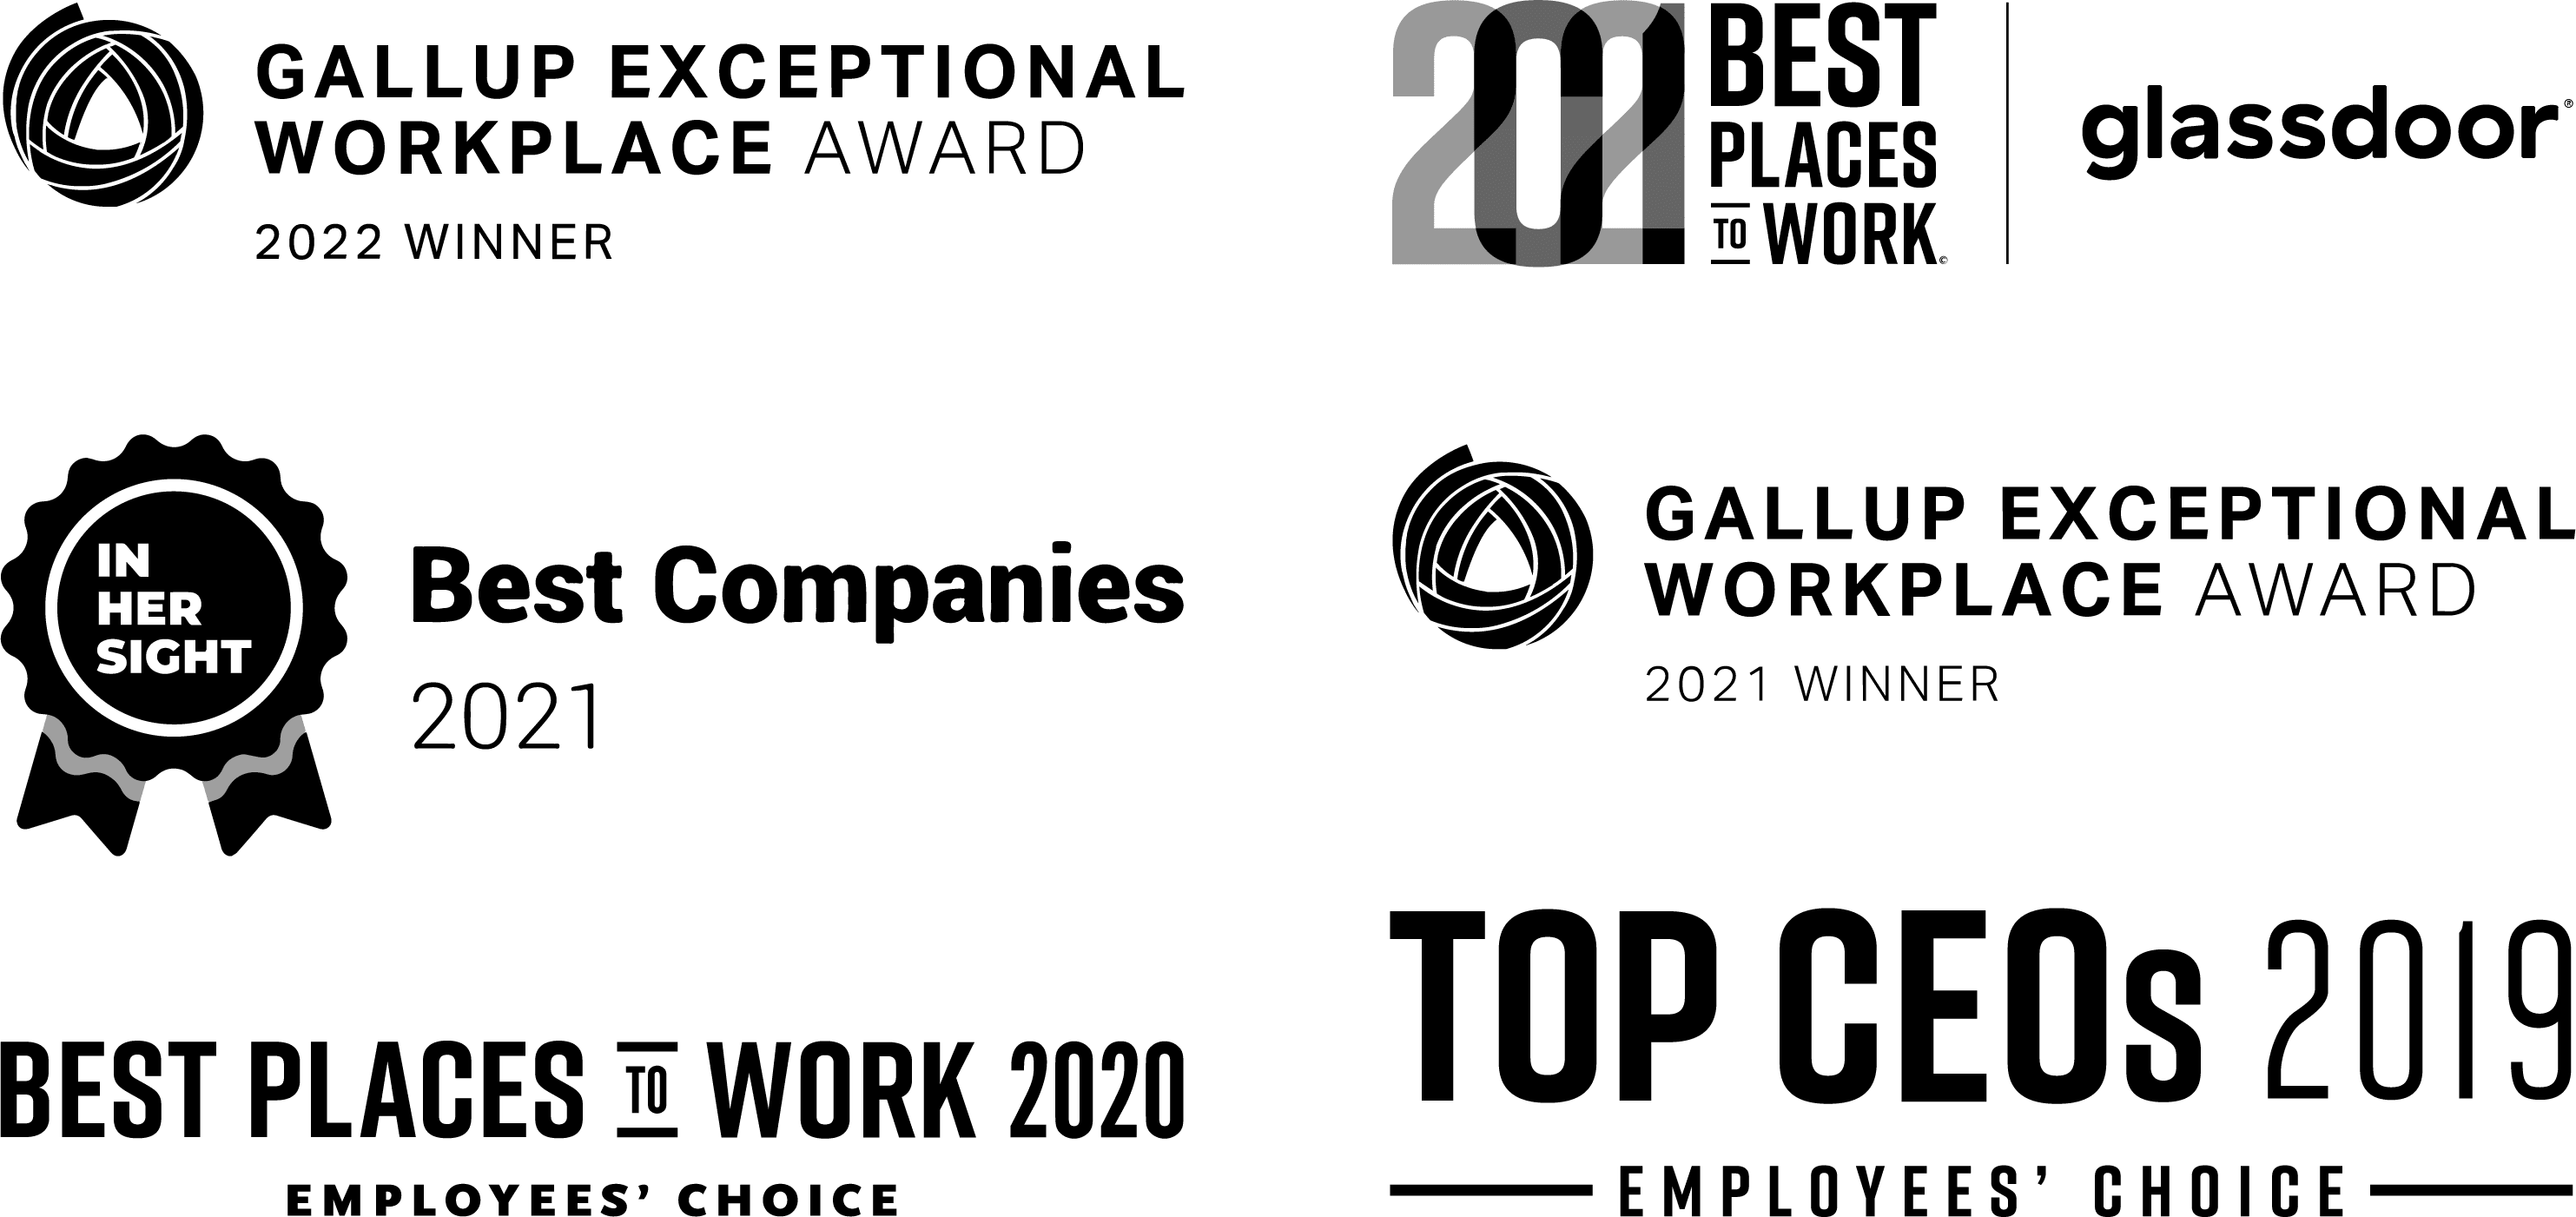 Life.Church Workplace Awards - including 2022 Gallup Exceptional Workplace, 2021 Glassdoor Best Places to Work